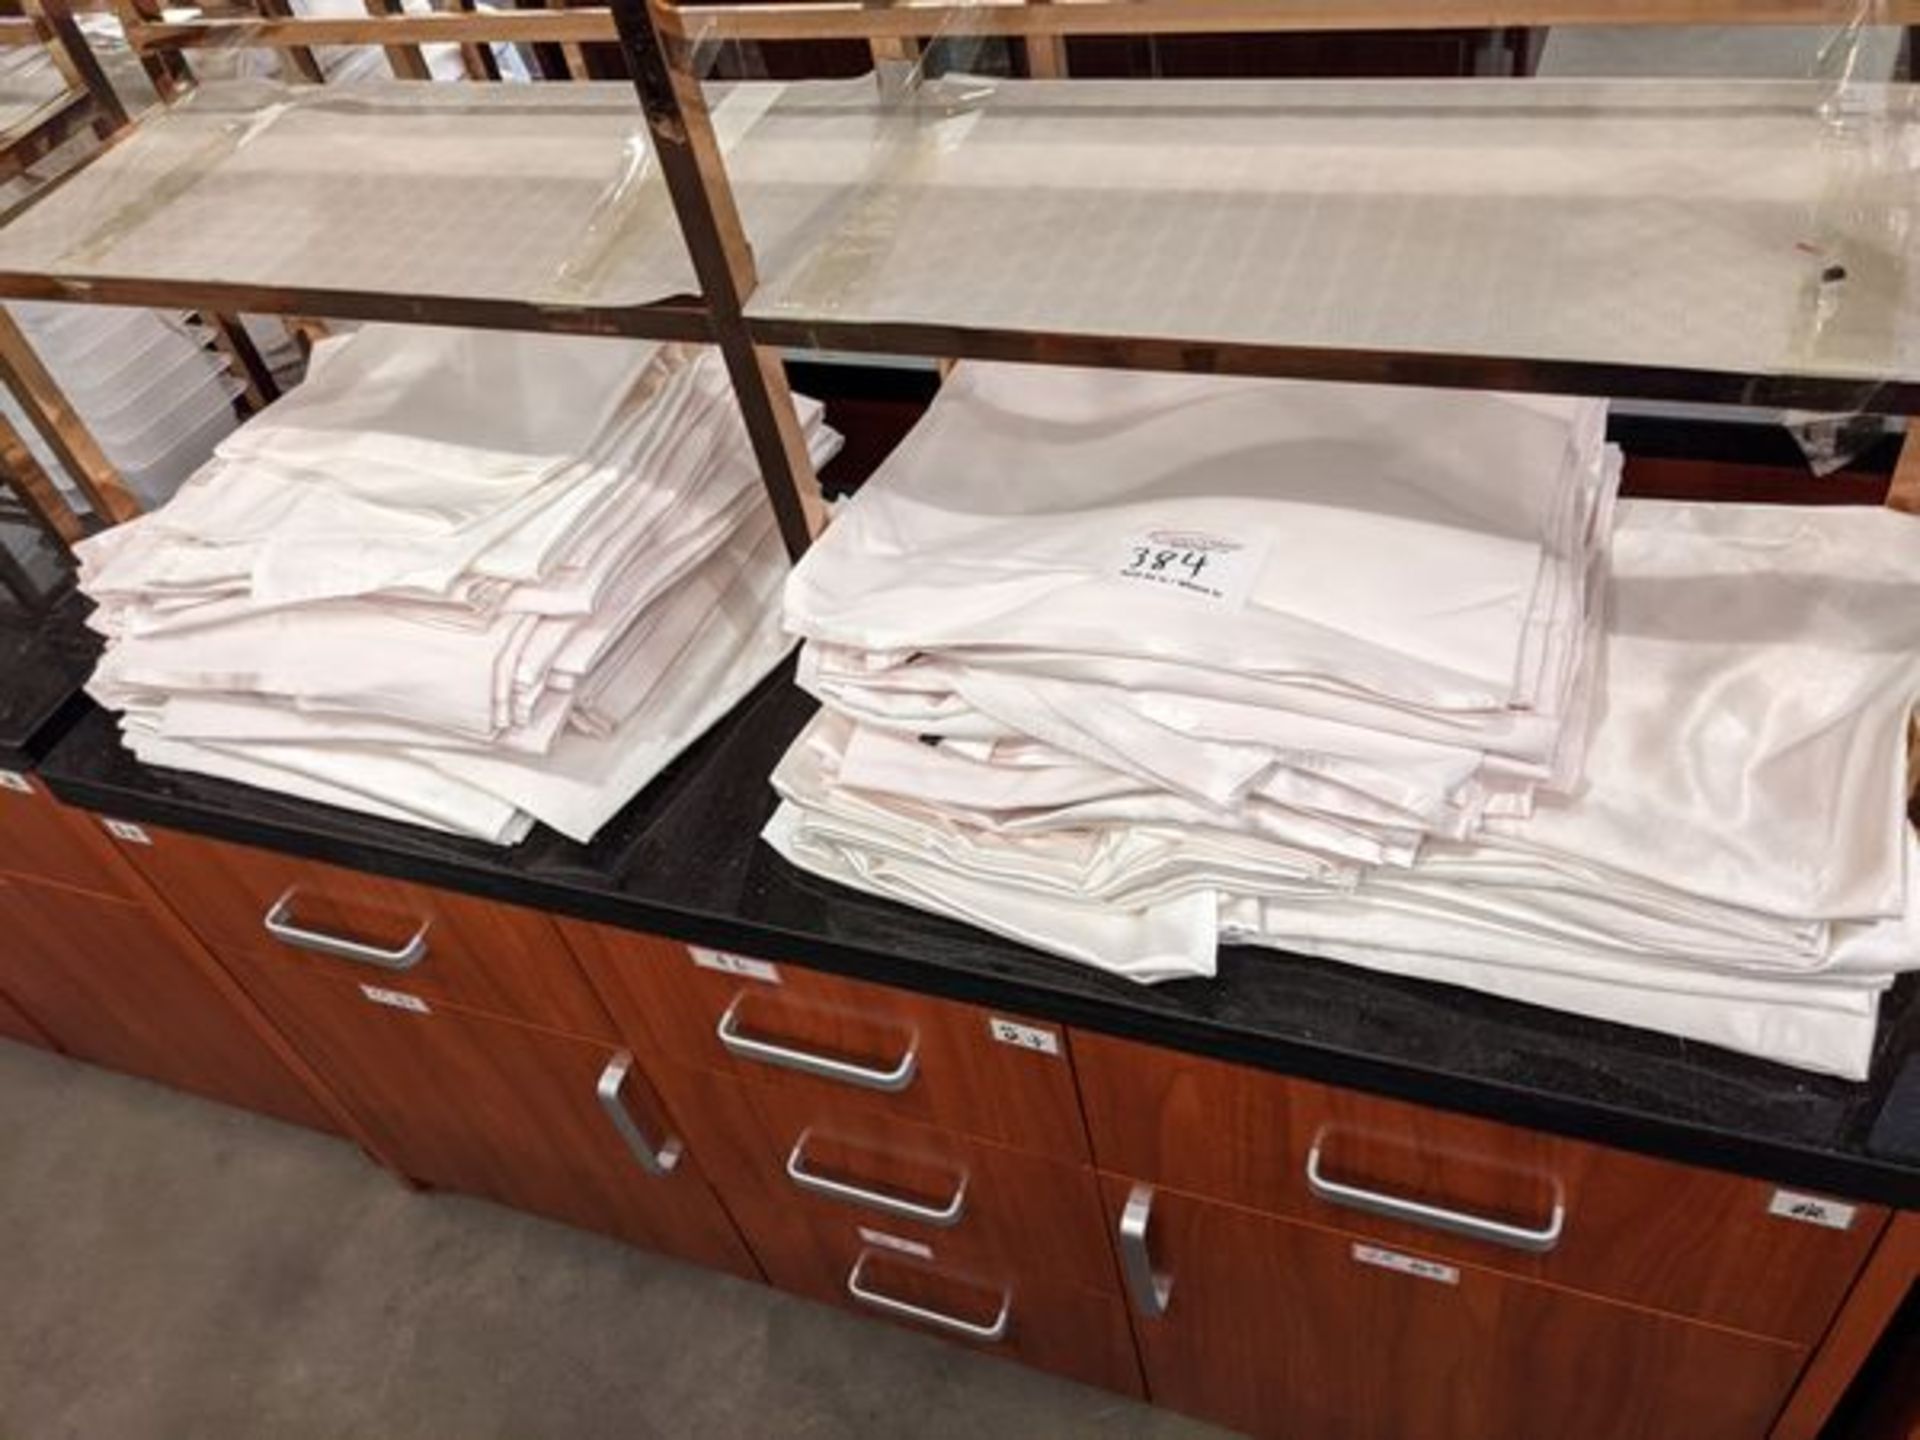 Approx Fifty 48 x 48" Unused White and Salmon Colored Table Cloths